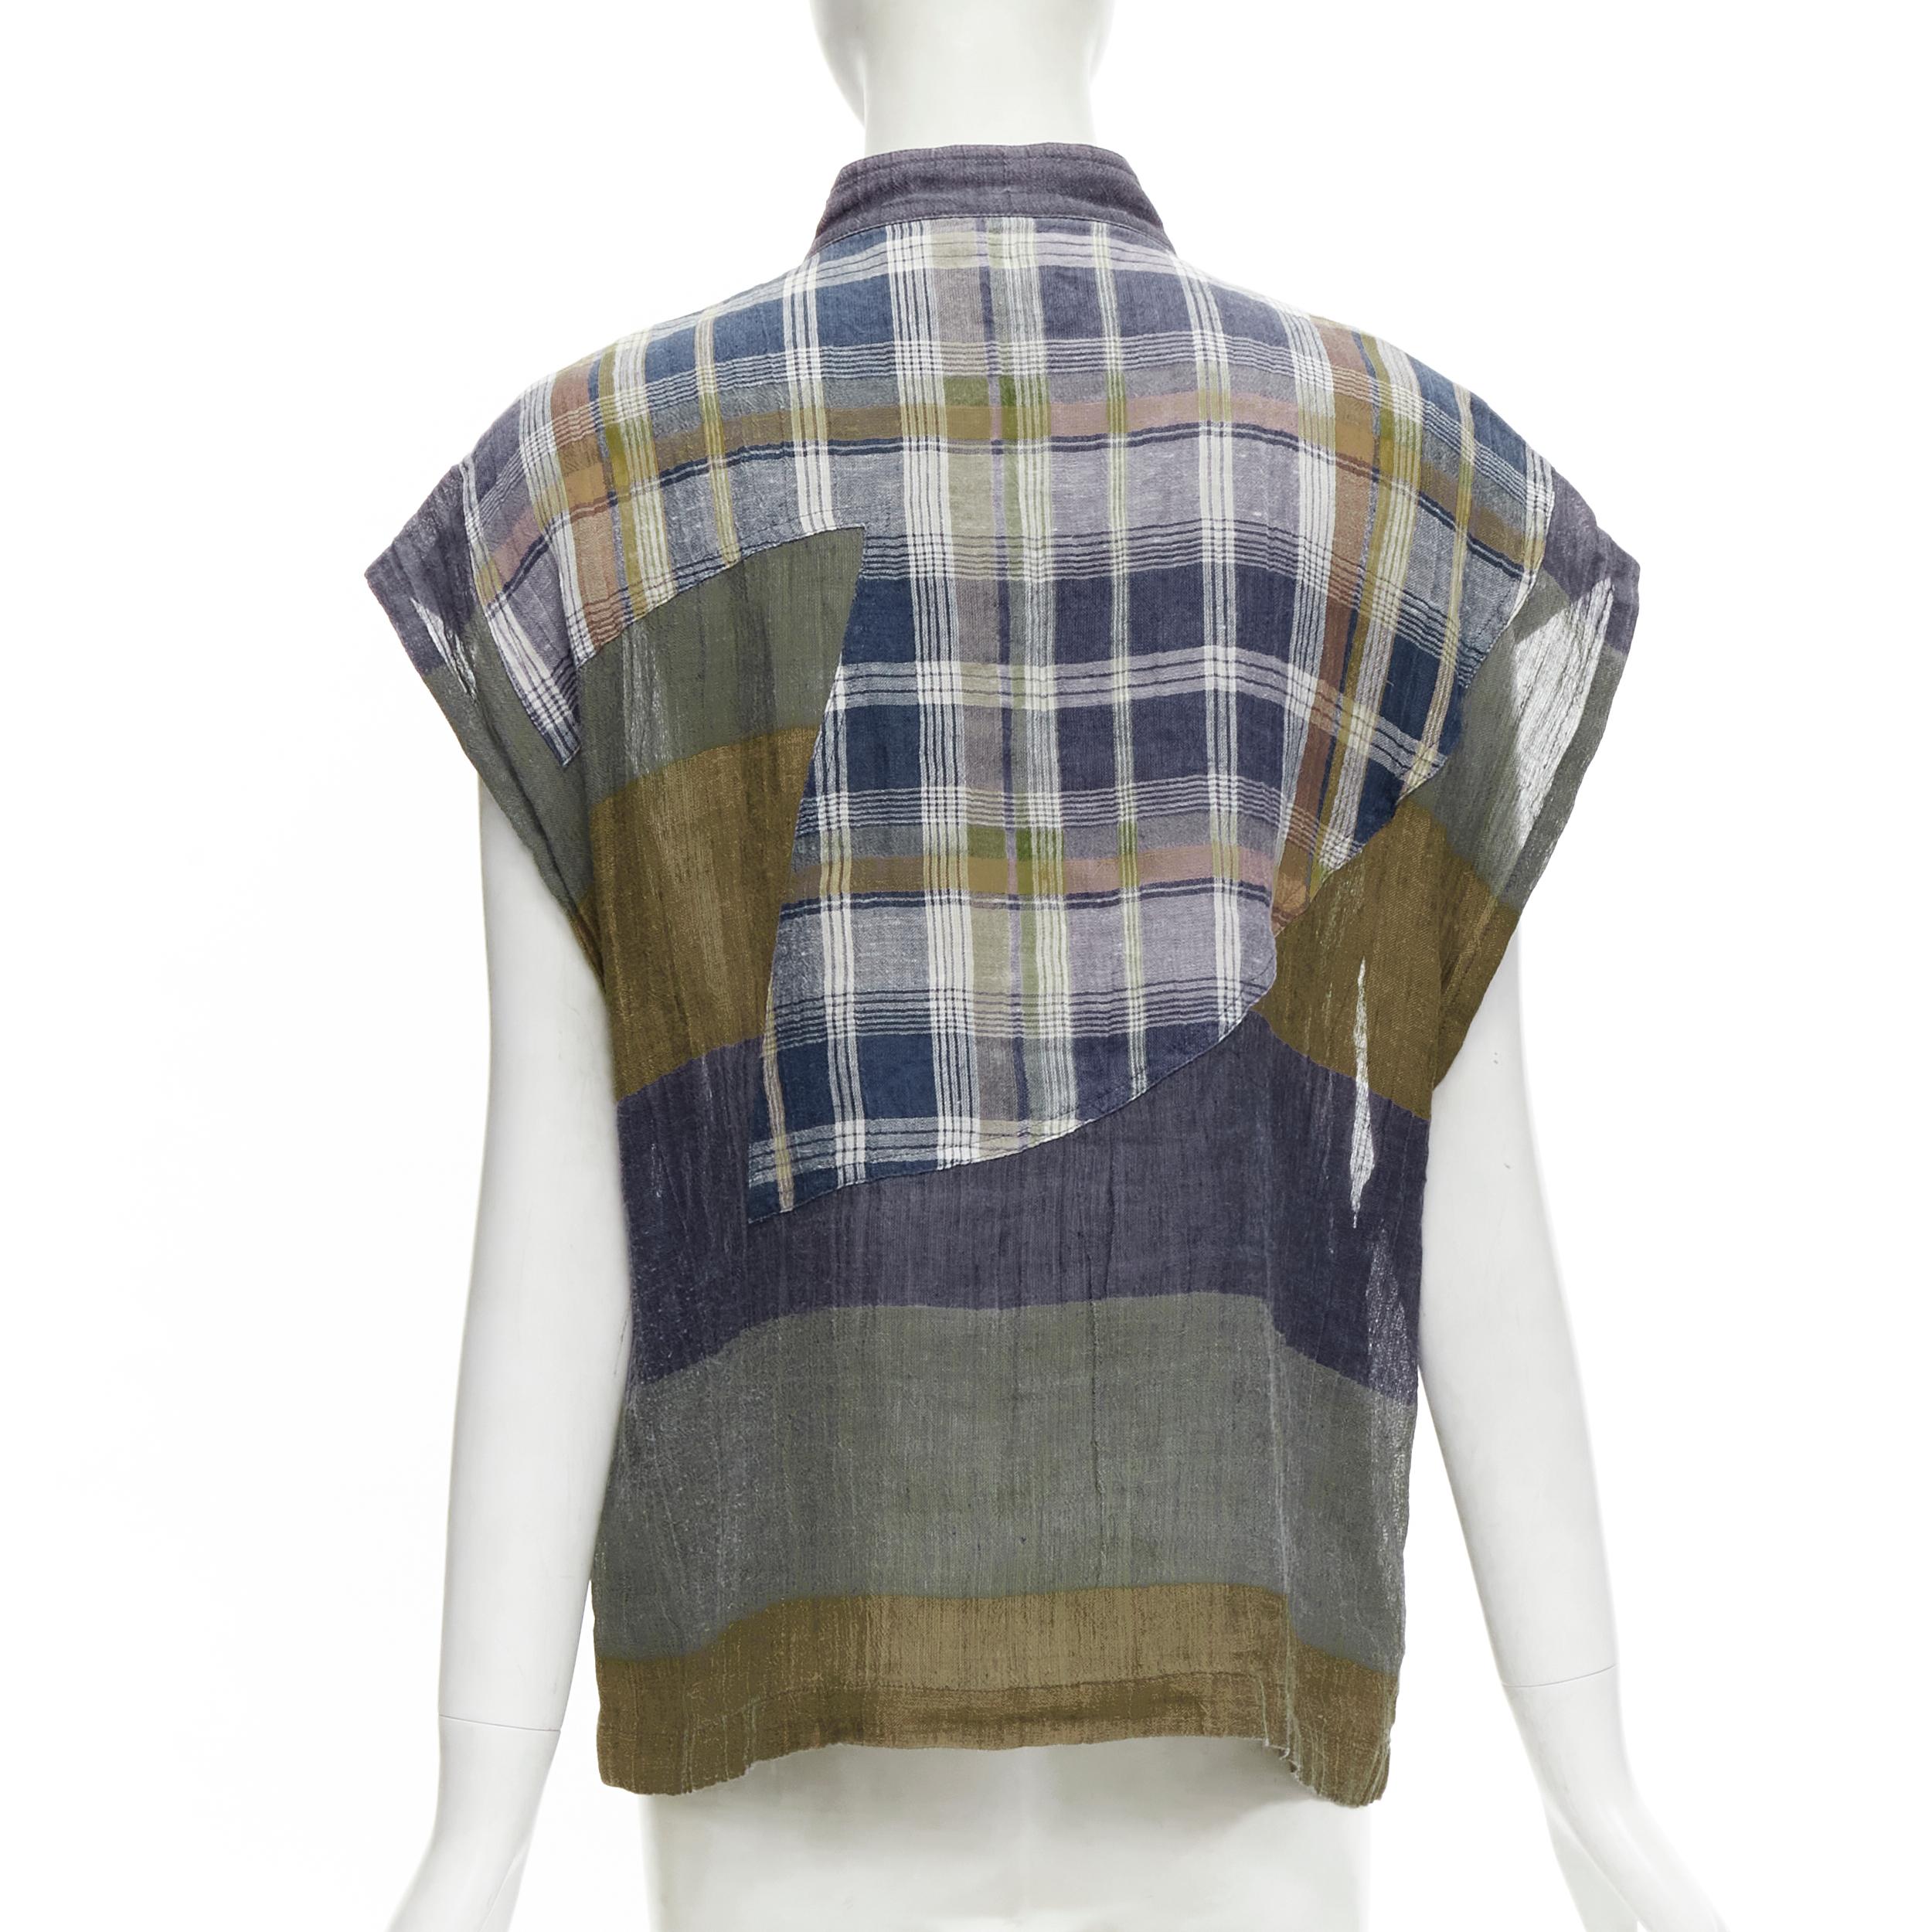 ISSEY MIYAKE Vintage 1970's 100% linen blue green check patchwork vest JP9 S
Reference: TGAS/C01672
Brand: Issey Miyake
Collection: 1970s
Material: Linen
Color: Multicolour
Pattern: Colorblock
Closure: Button
Extra Details: Plaid patchwork detail at